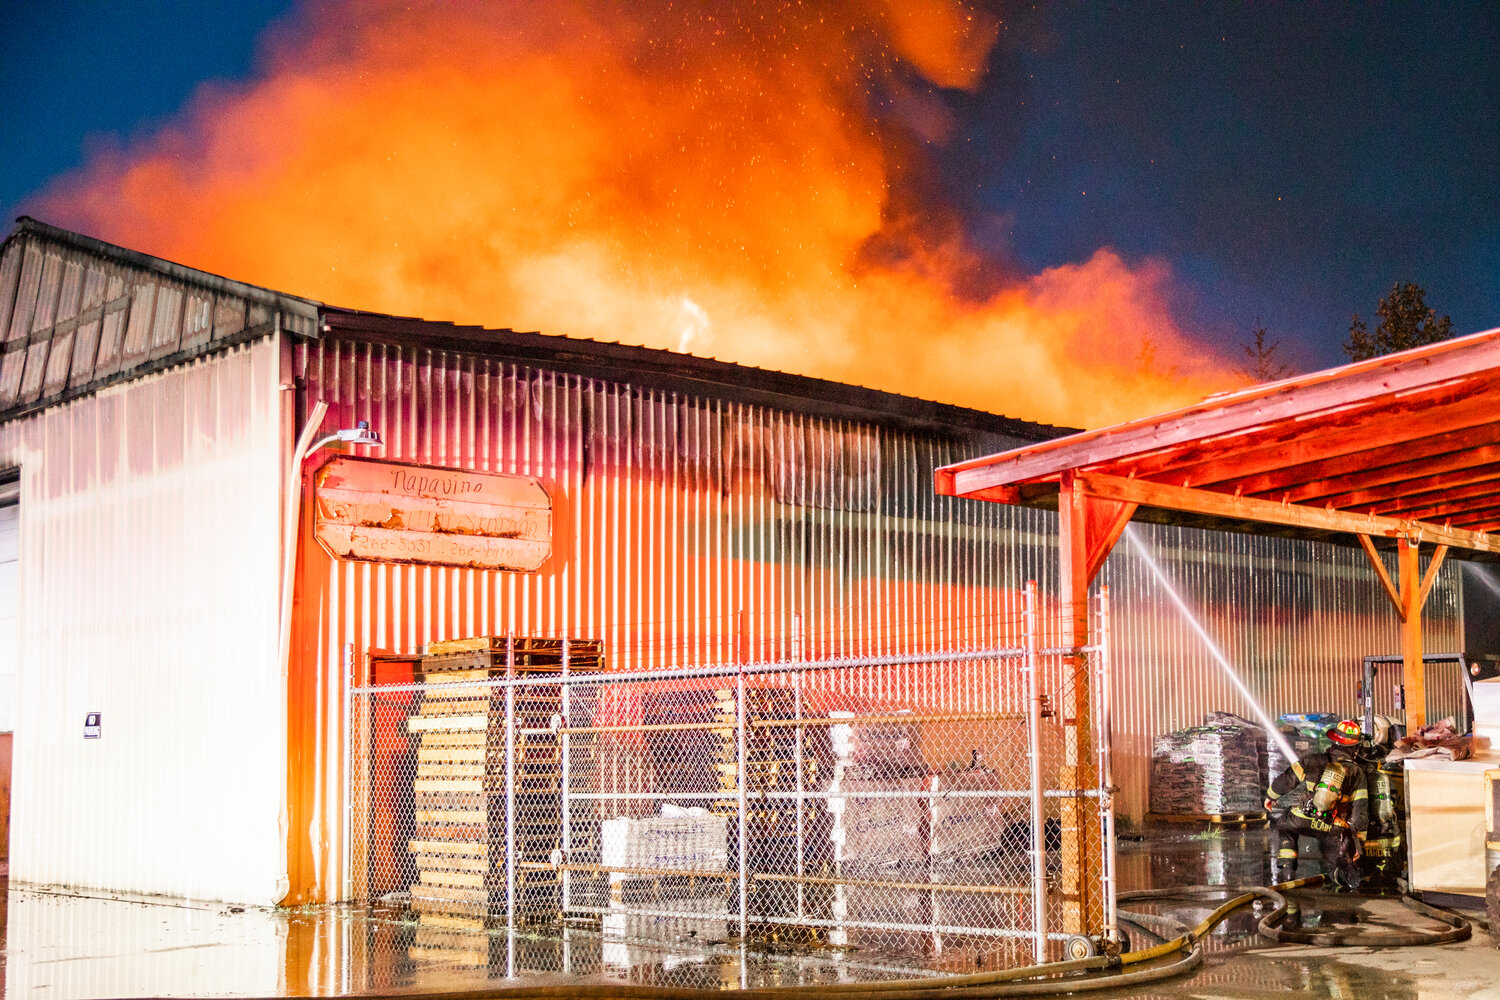 Firefighters push back flames breaking out of the top of an aluminum storage building in Napavine on Saturday night.